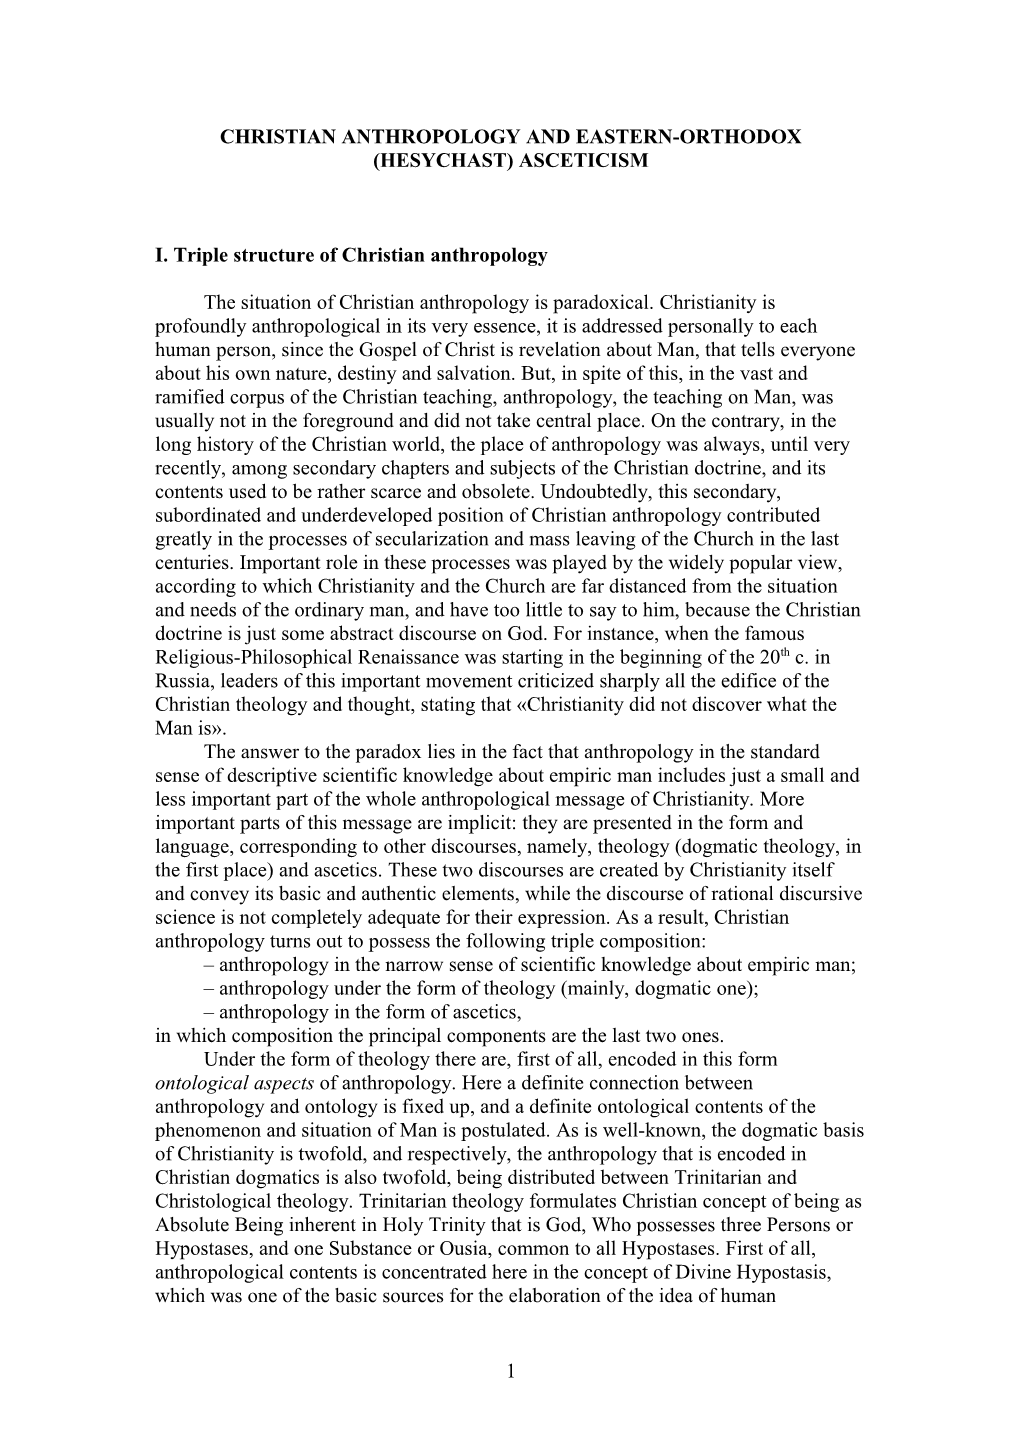 Christian Anthropology and Eastern-Orthodox (Hesychast) Asceticism